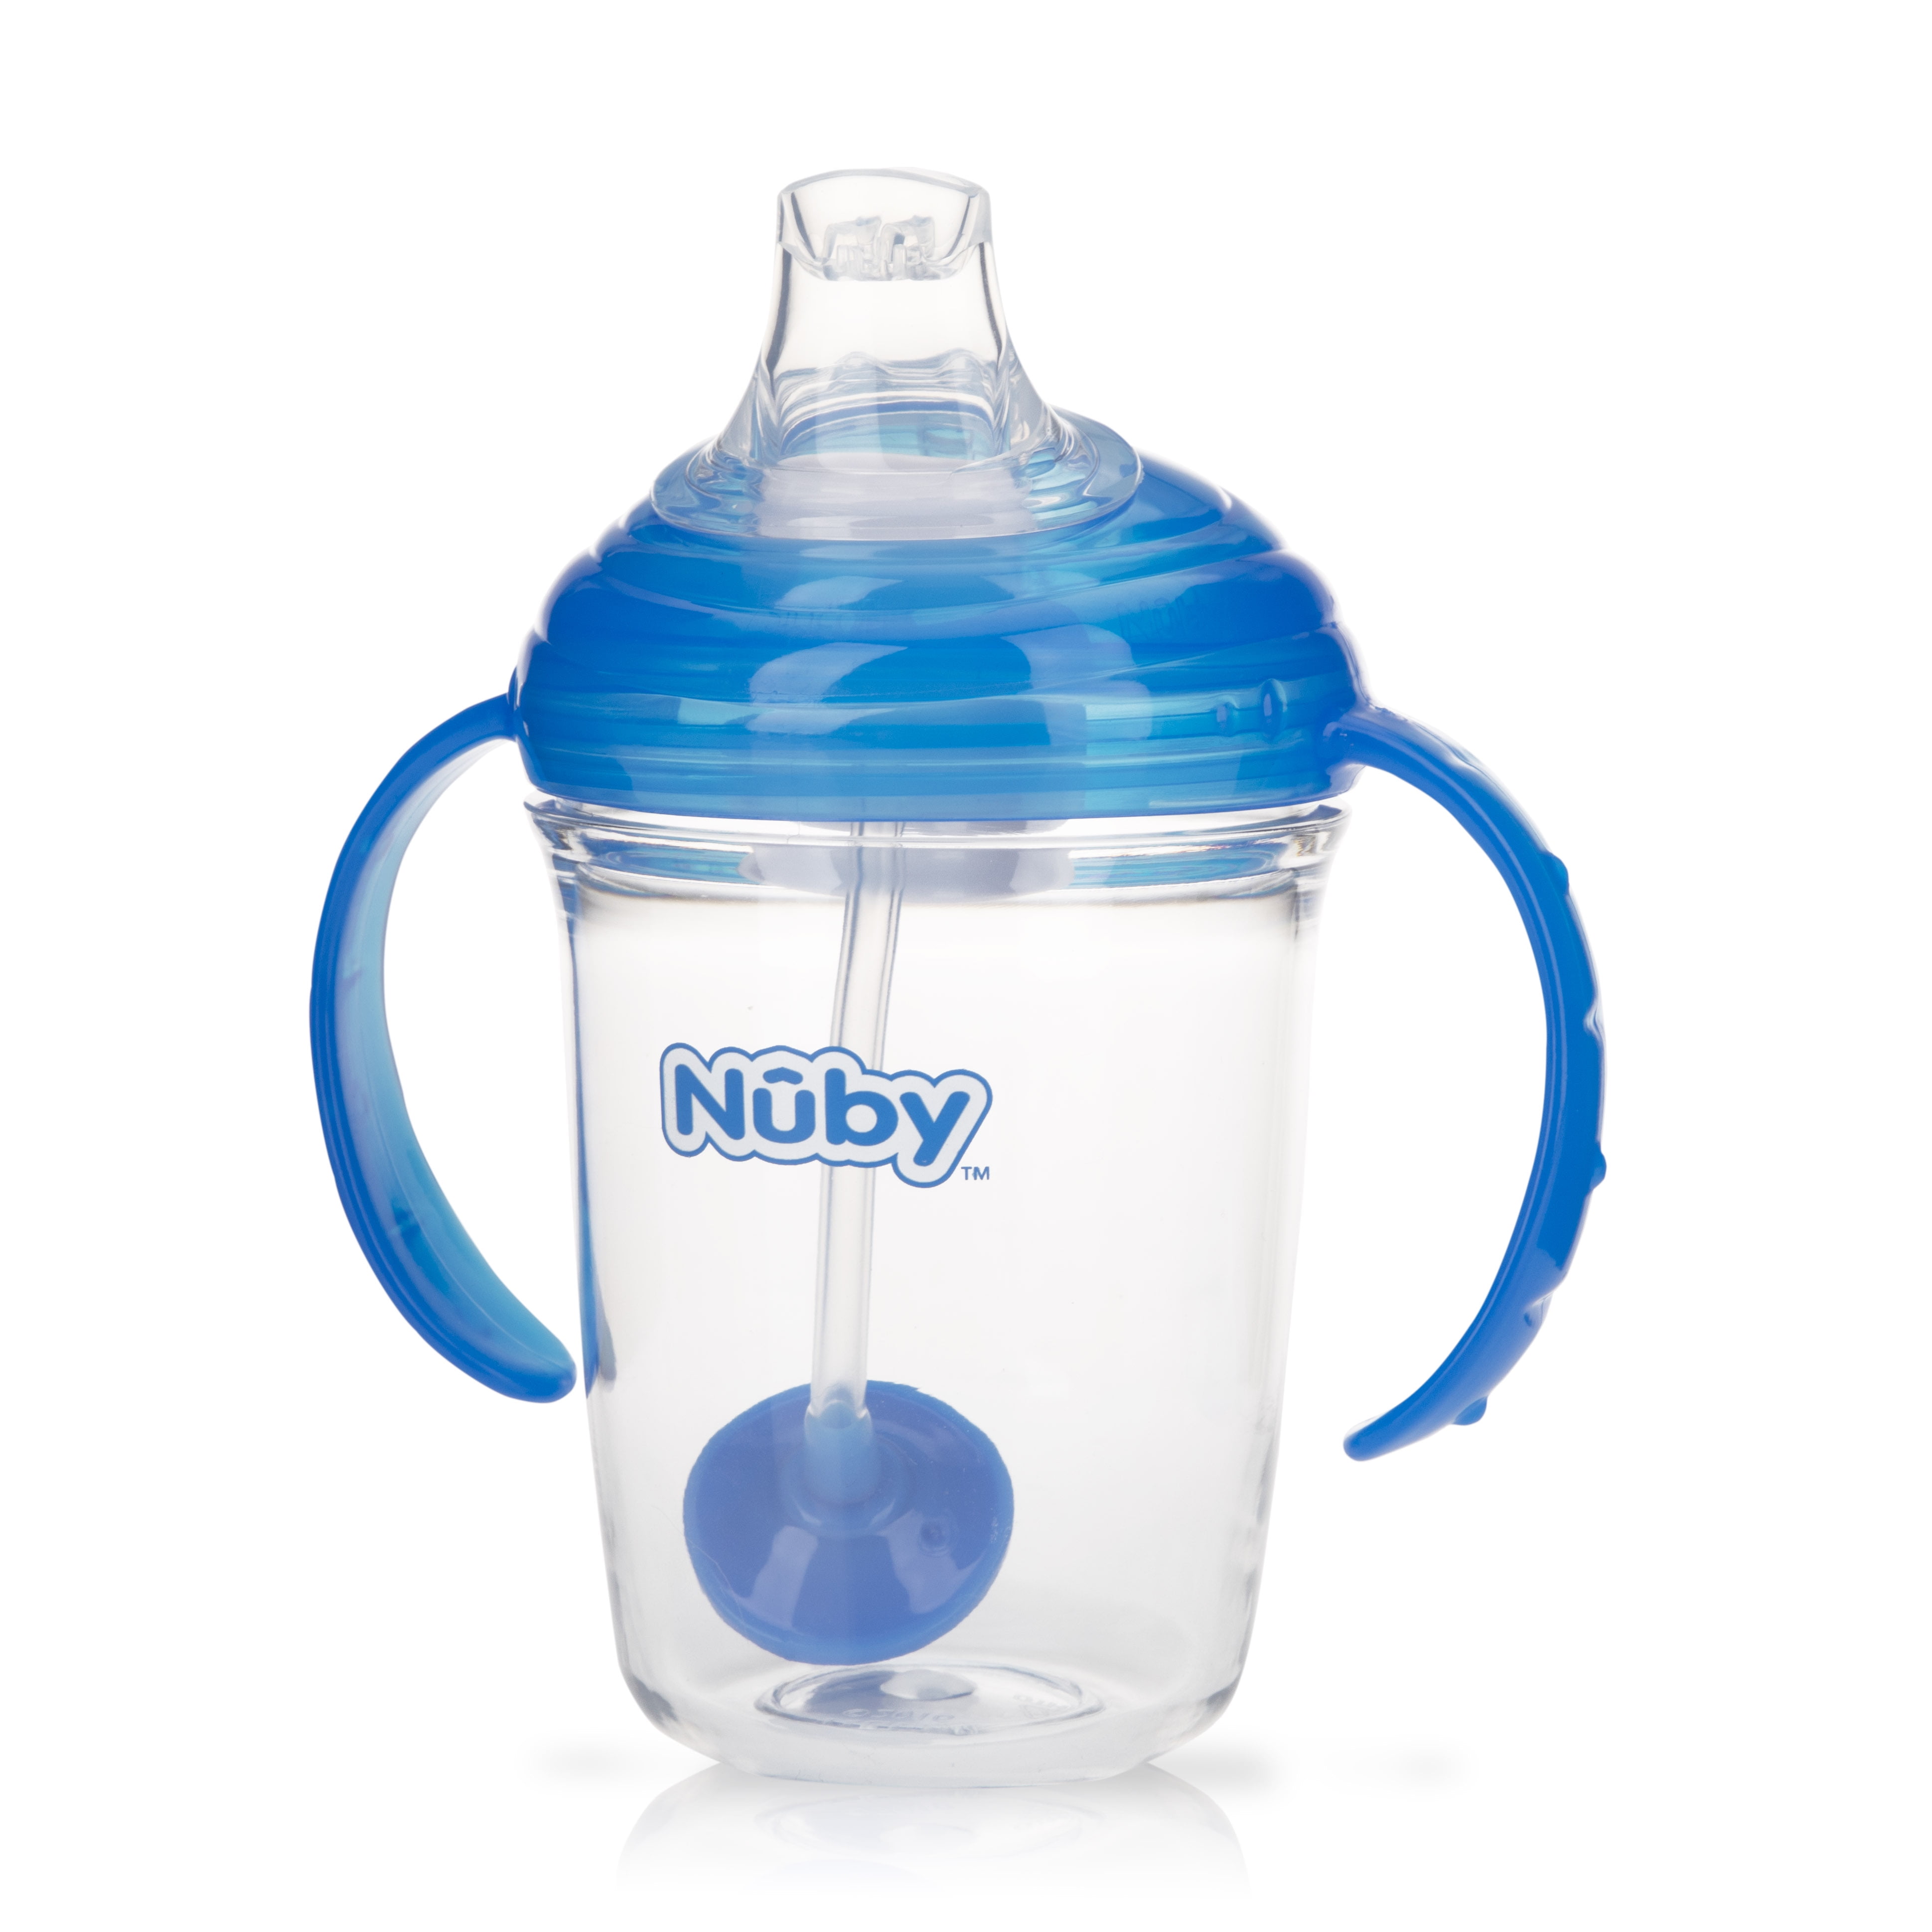 Weighted Straw Sippy Cup Spill-Proof Cups For Kids No-Spill Cups